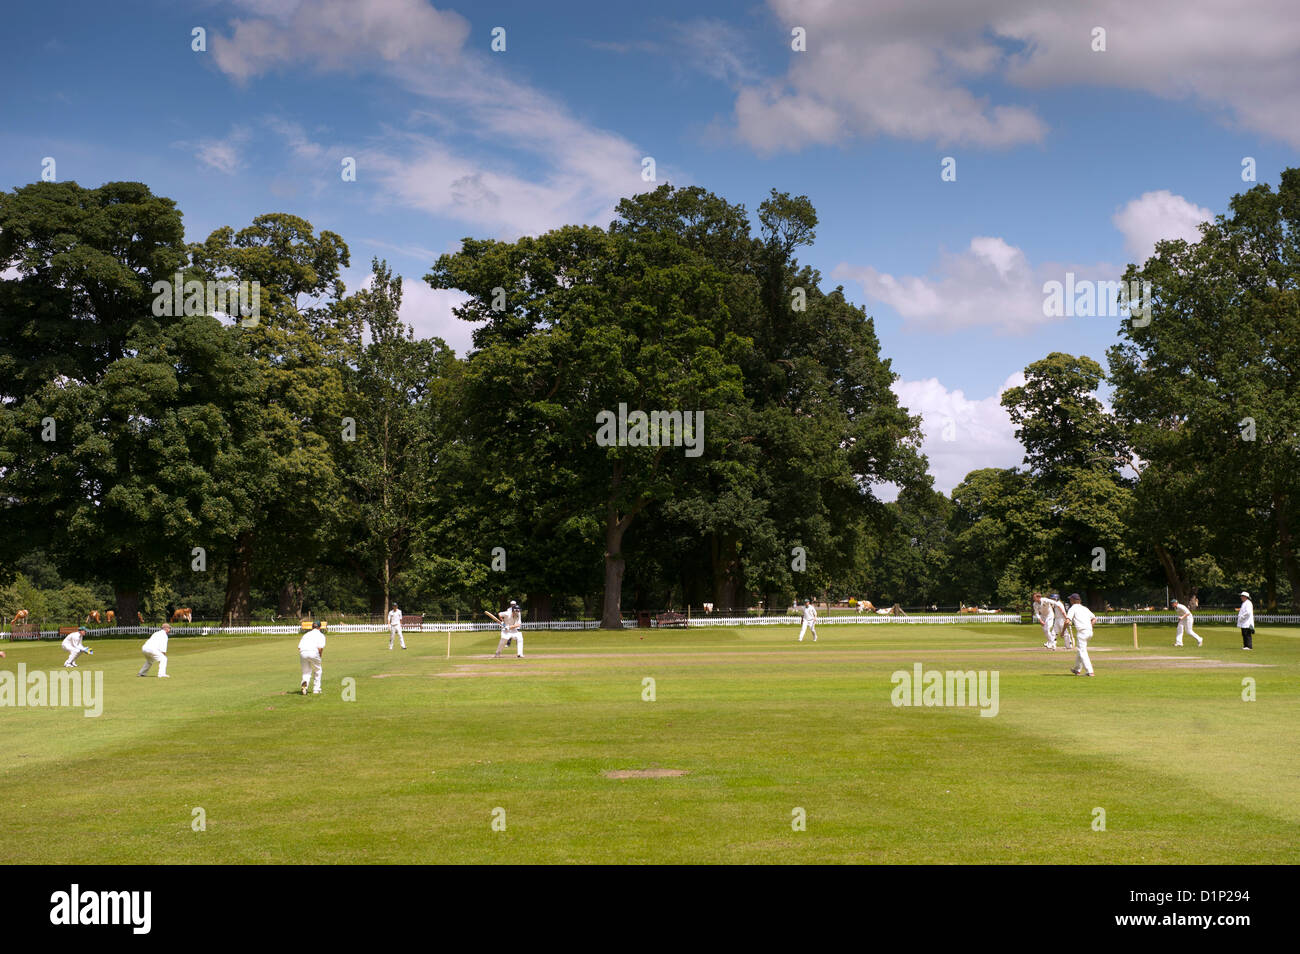 Game of cricket on a summers afternoon in an English village. Stock Photo